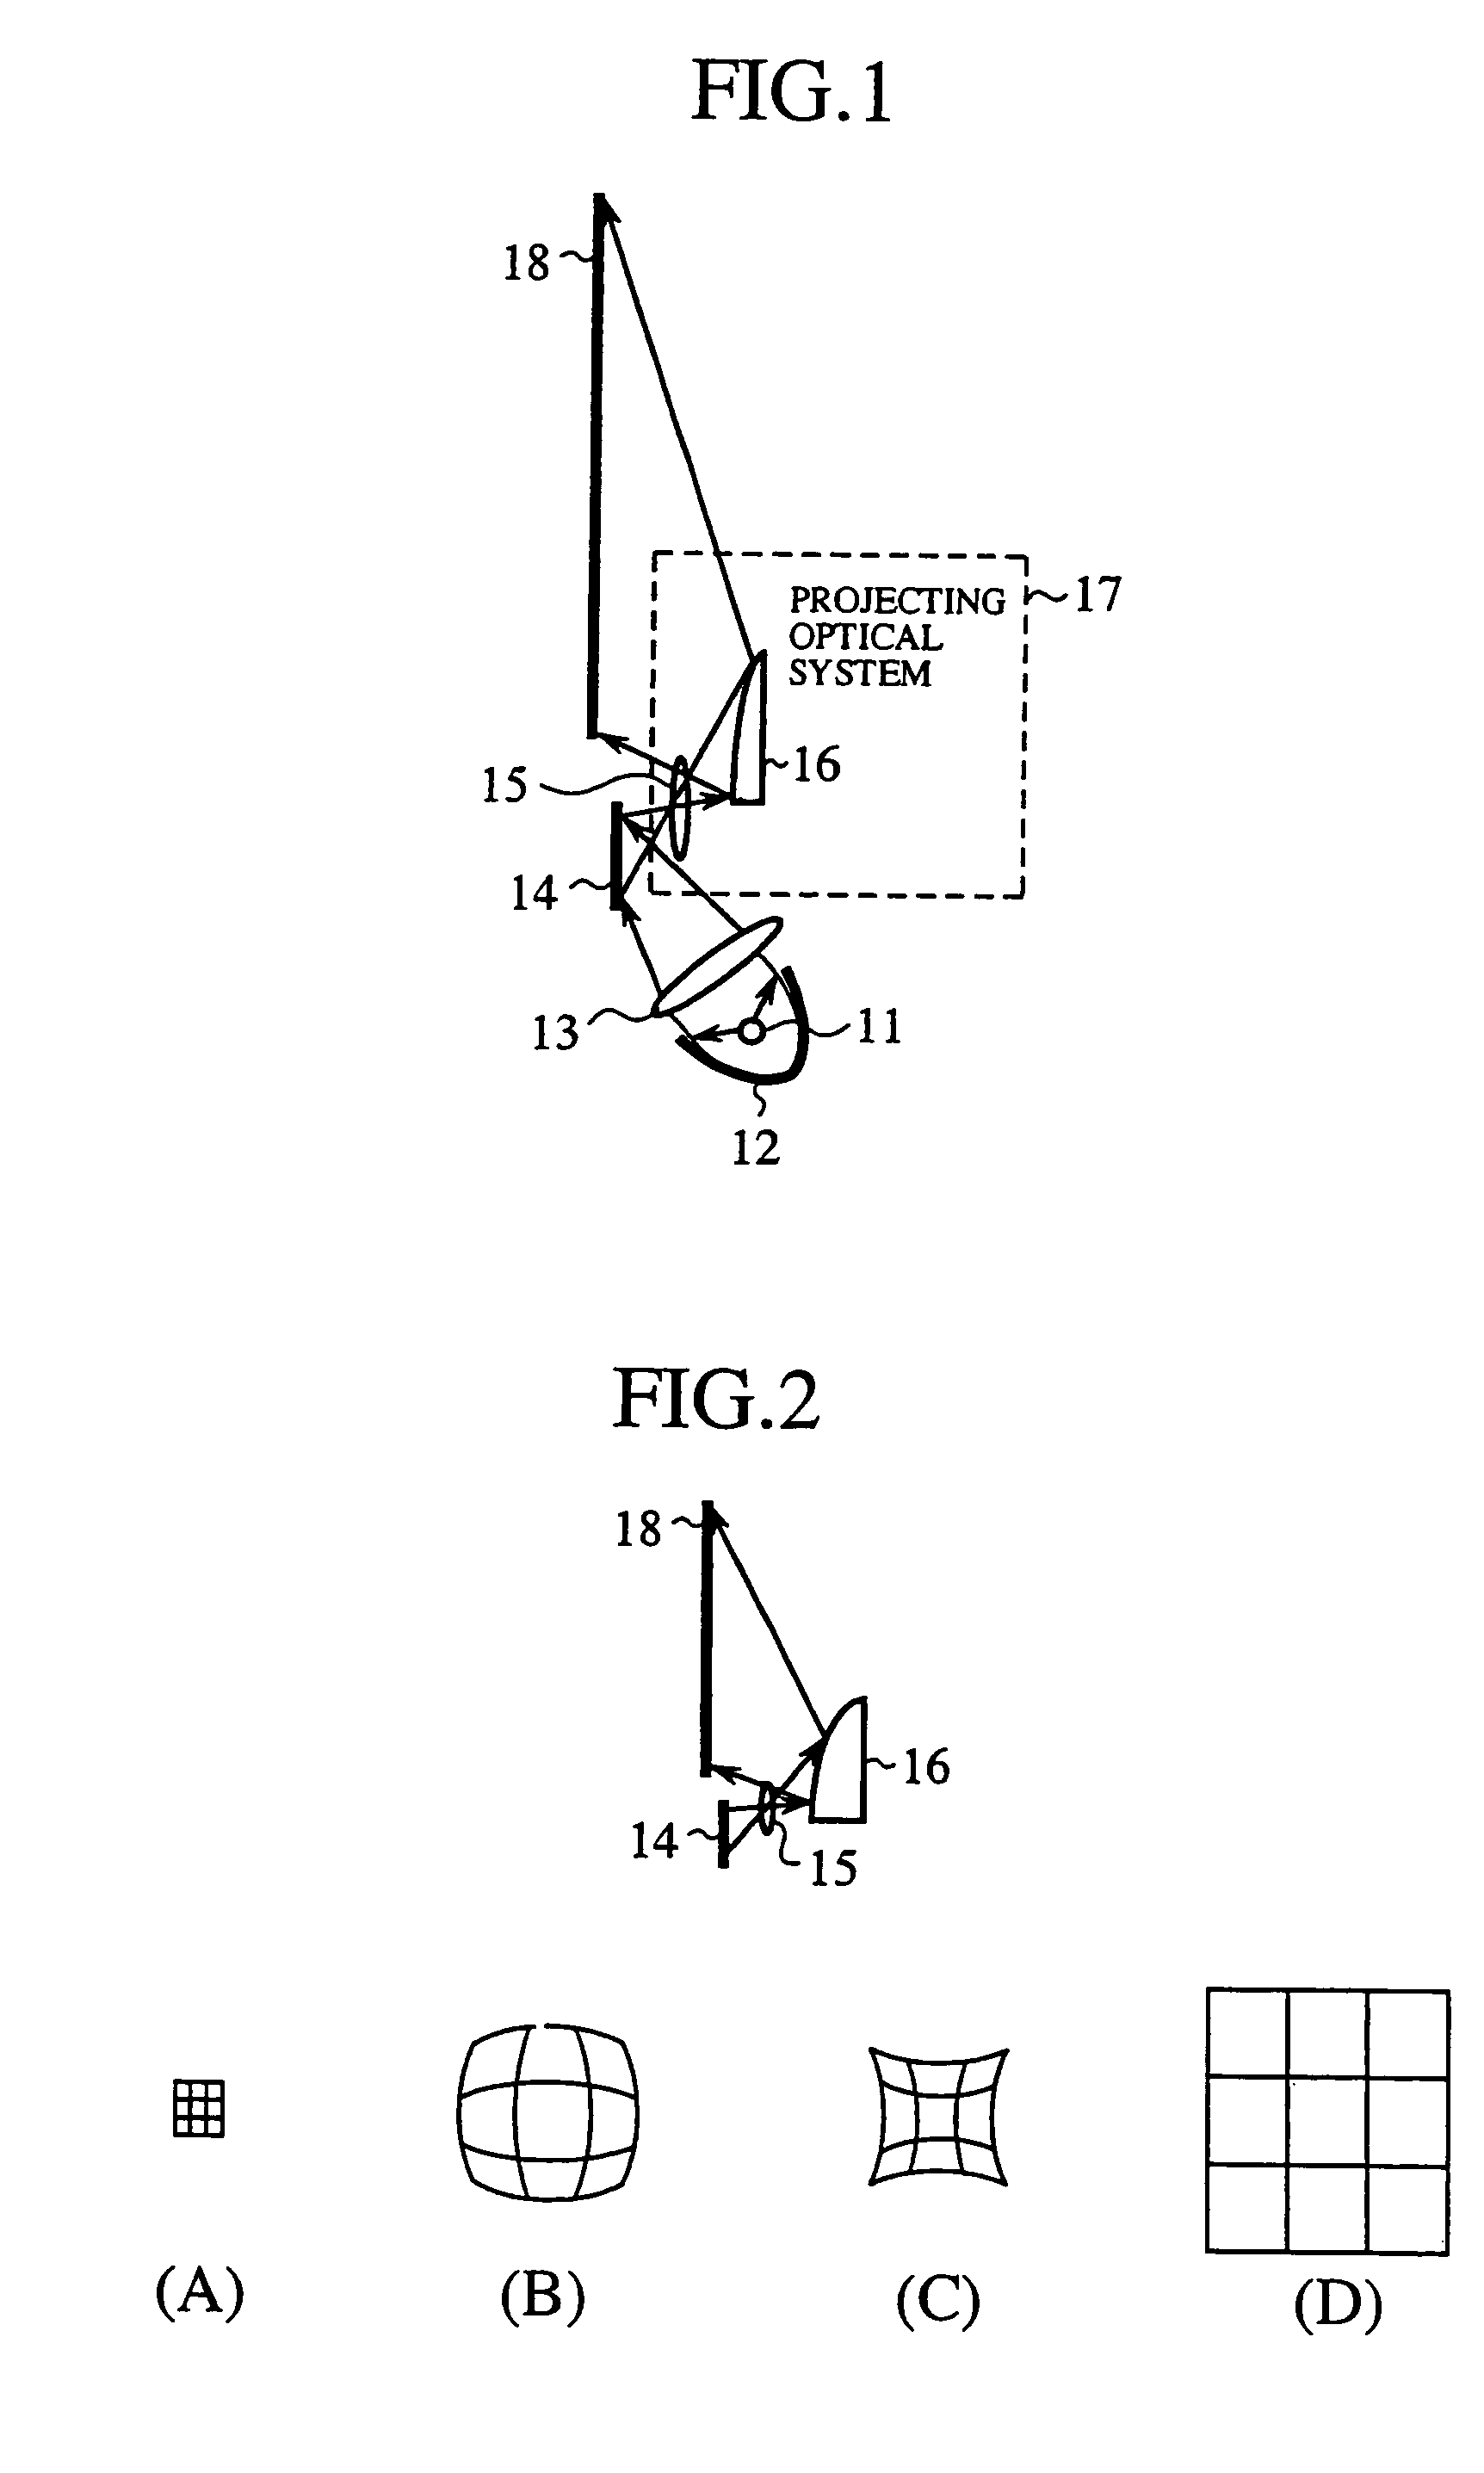 Image display device and adjustment for alignment